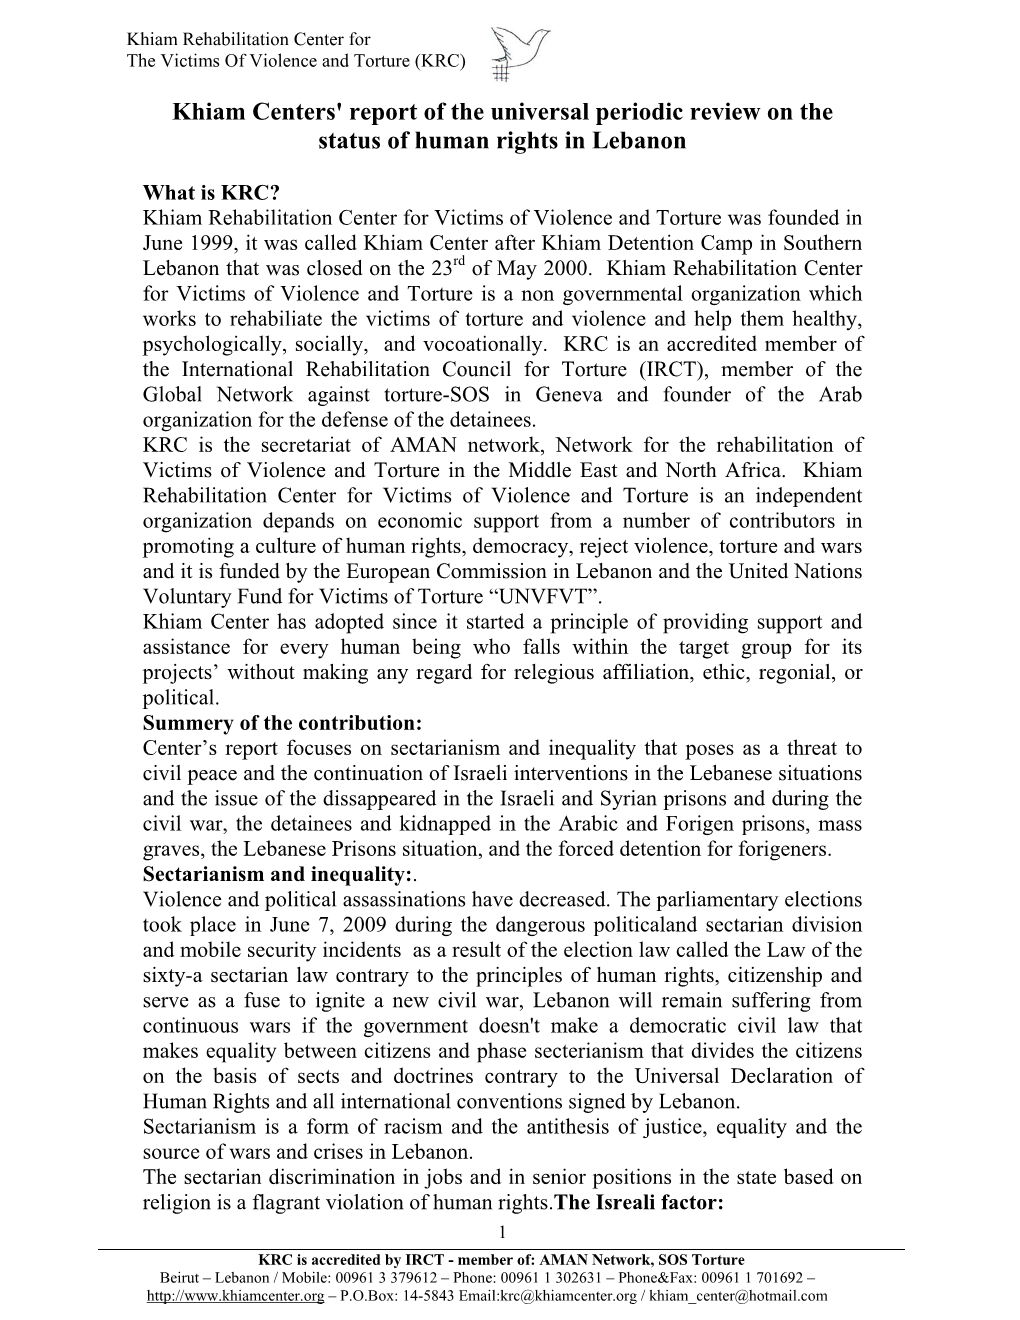 Khiam Centers' Report of the Universal Periodic Review on the Status of Human Rights in Lebanon